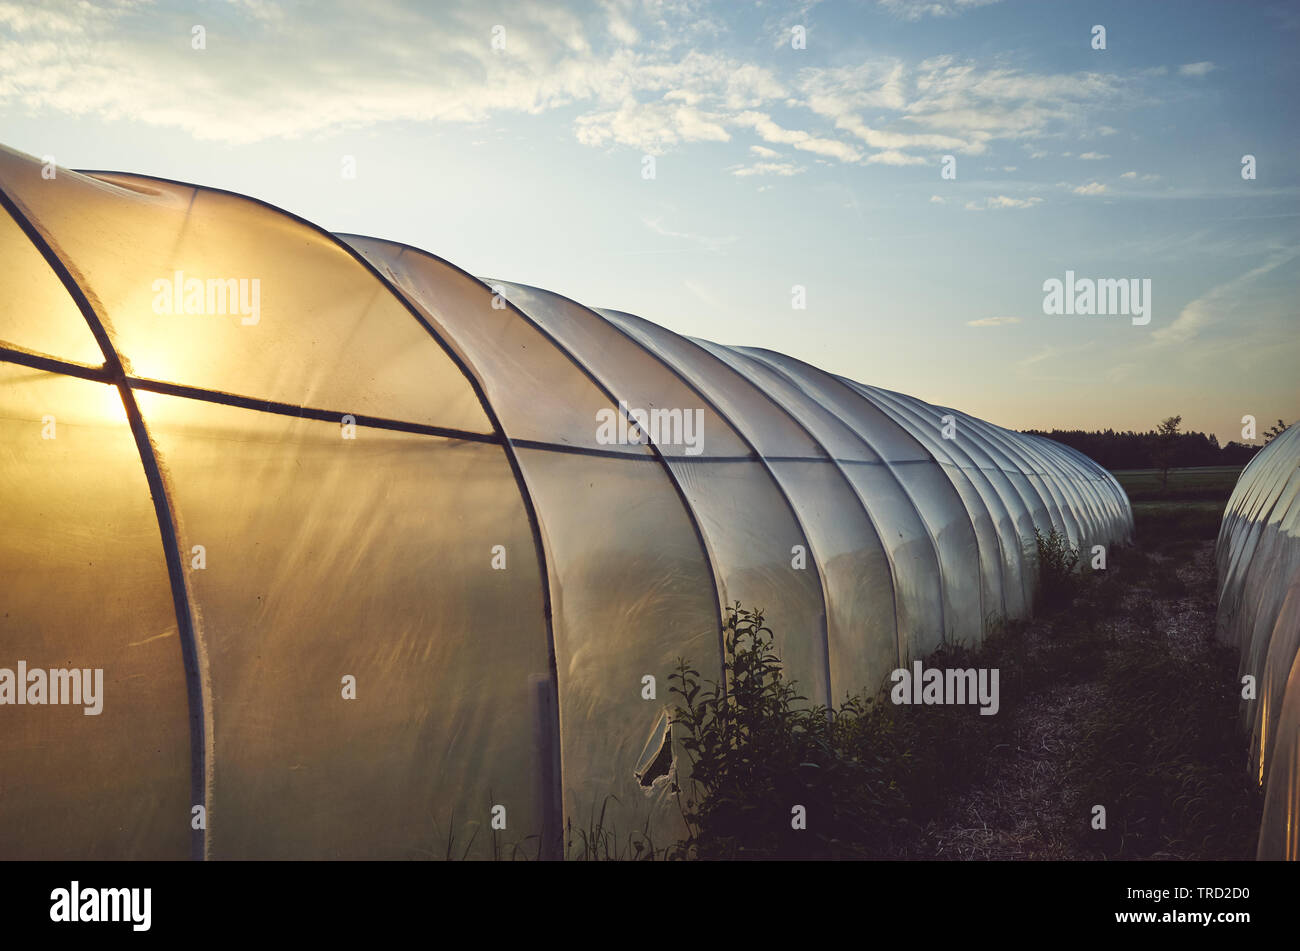 Plastic greenhouse illuminated by the sunset, color toned picture. Stock Photo